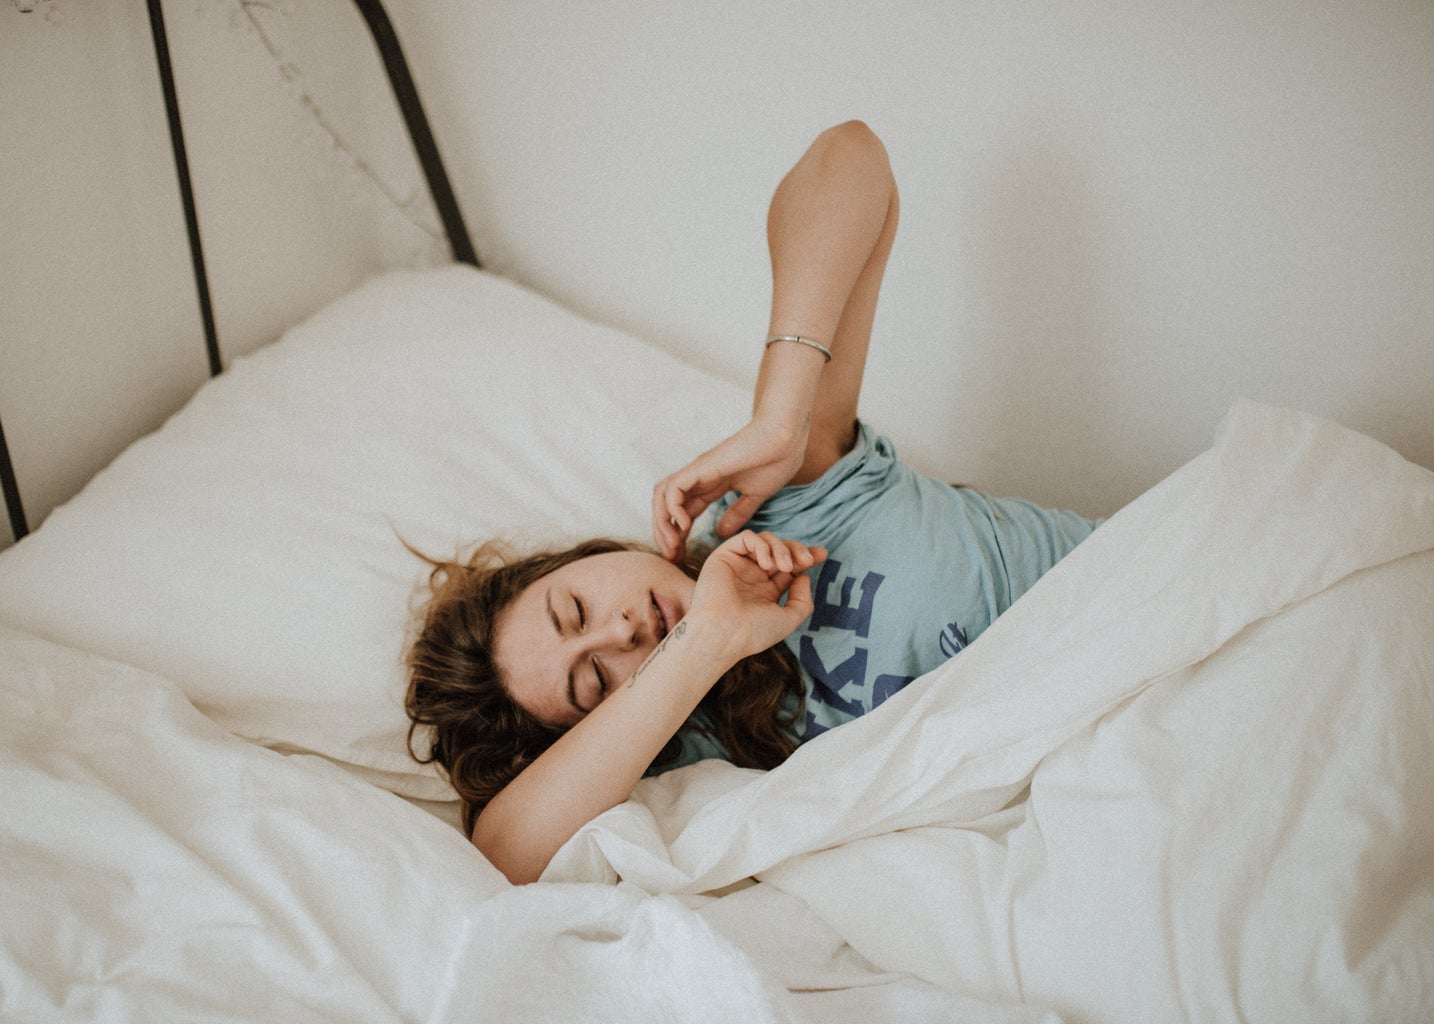 woman stretching in bed in sleepy daze